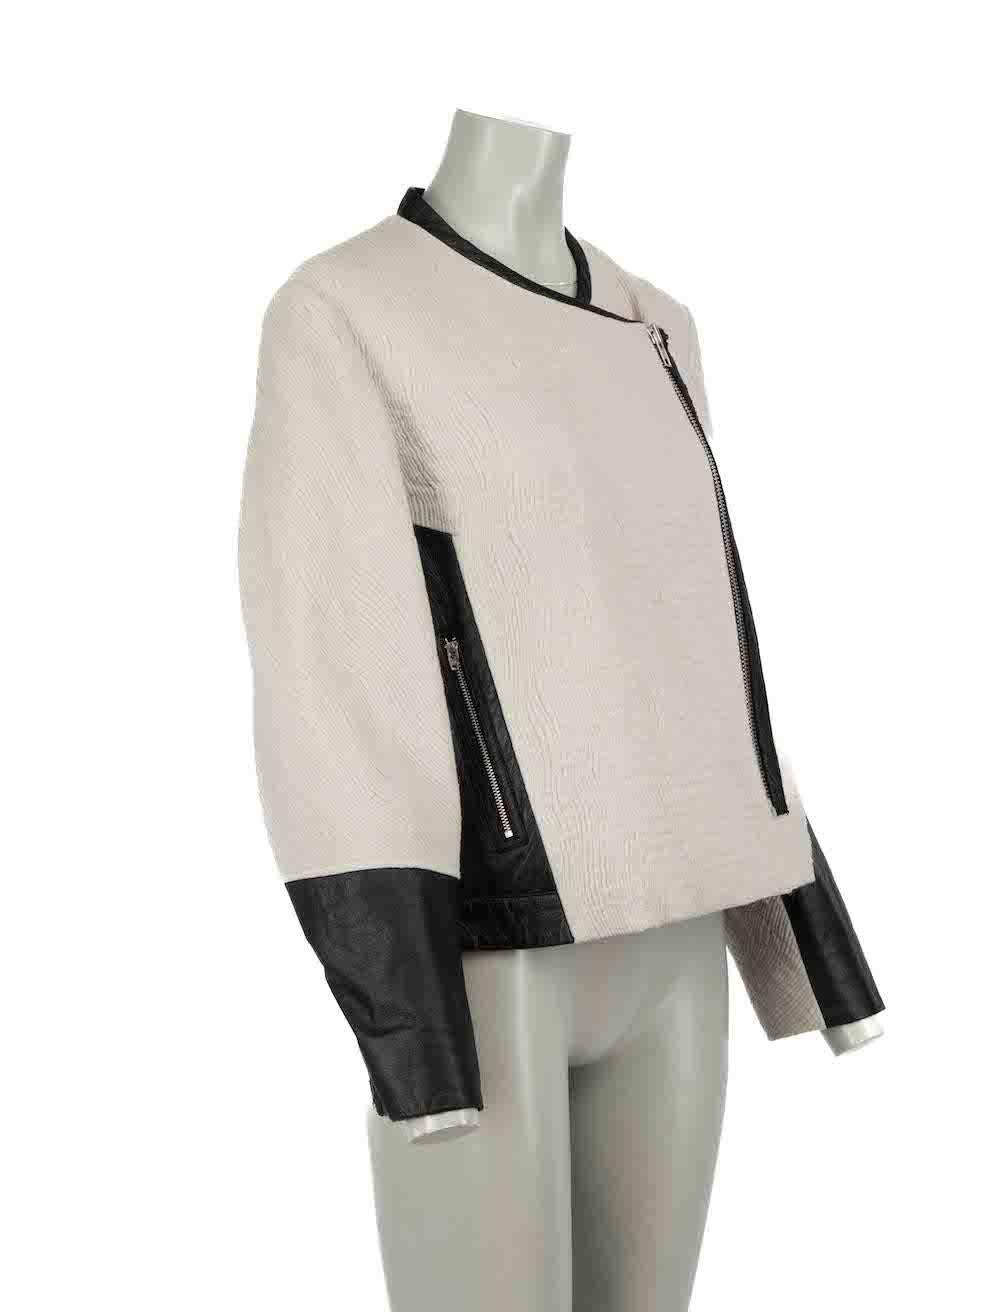 CONDITION is Very good. Minimal wear to jacket is evident. Minimal pilling to outer fabric on this used Helmut Lang designer resale item.
 
 Details
 Grey
 Wool
 Biker jacket
 Textured
 Leather panelled accent
 Front asymmetric zip closure
 2x Front